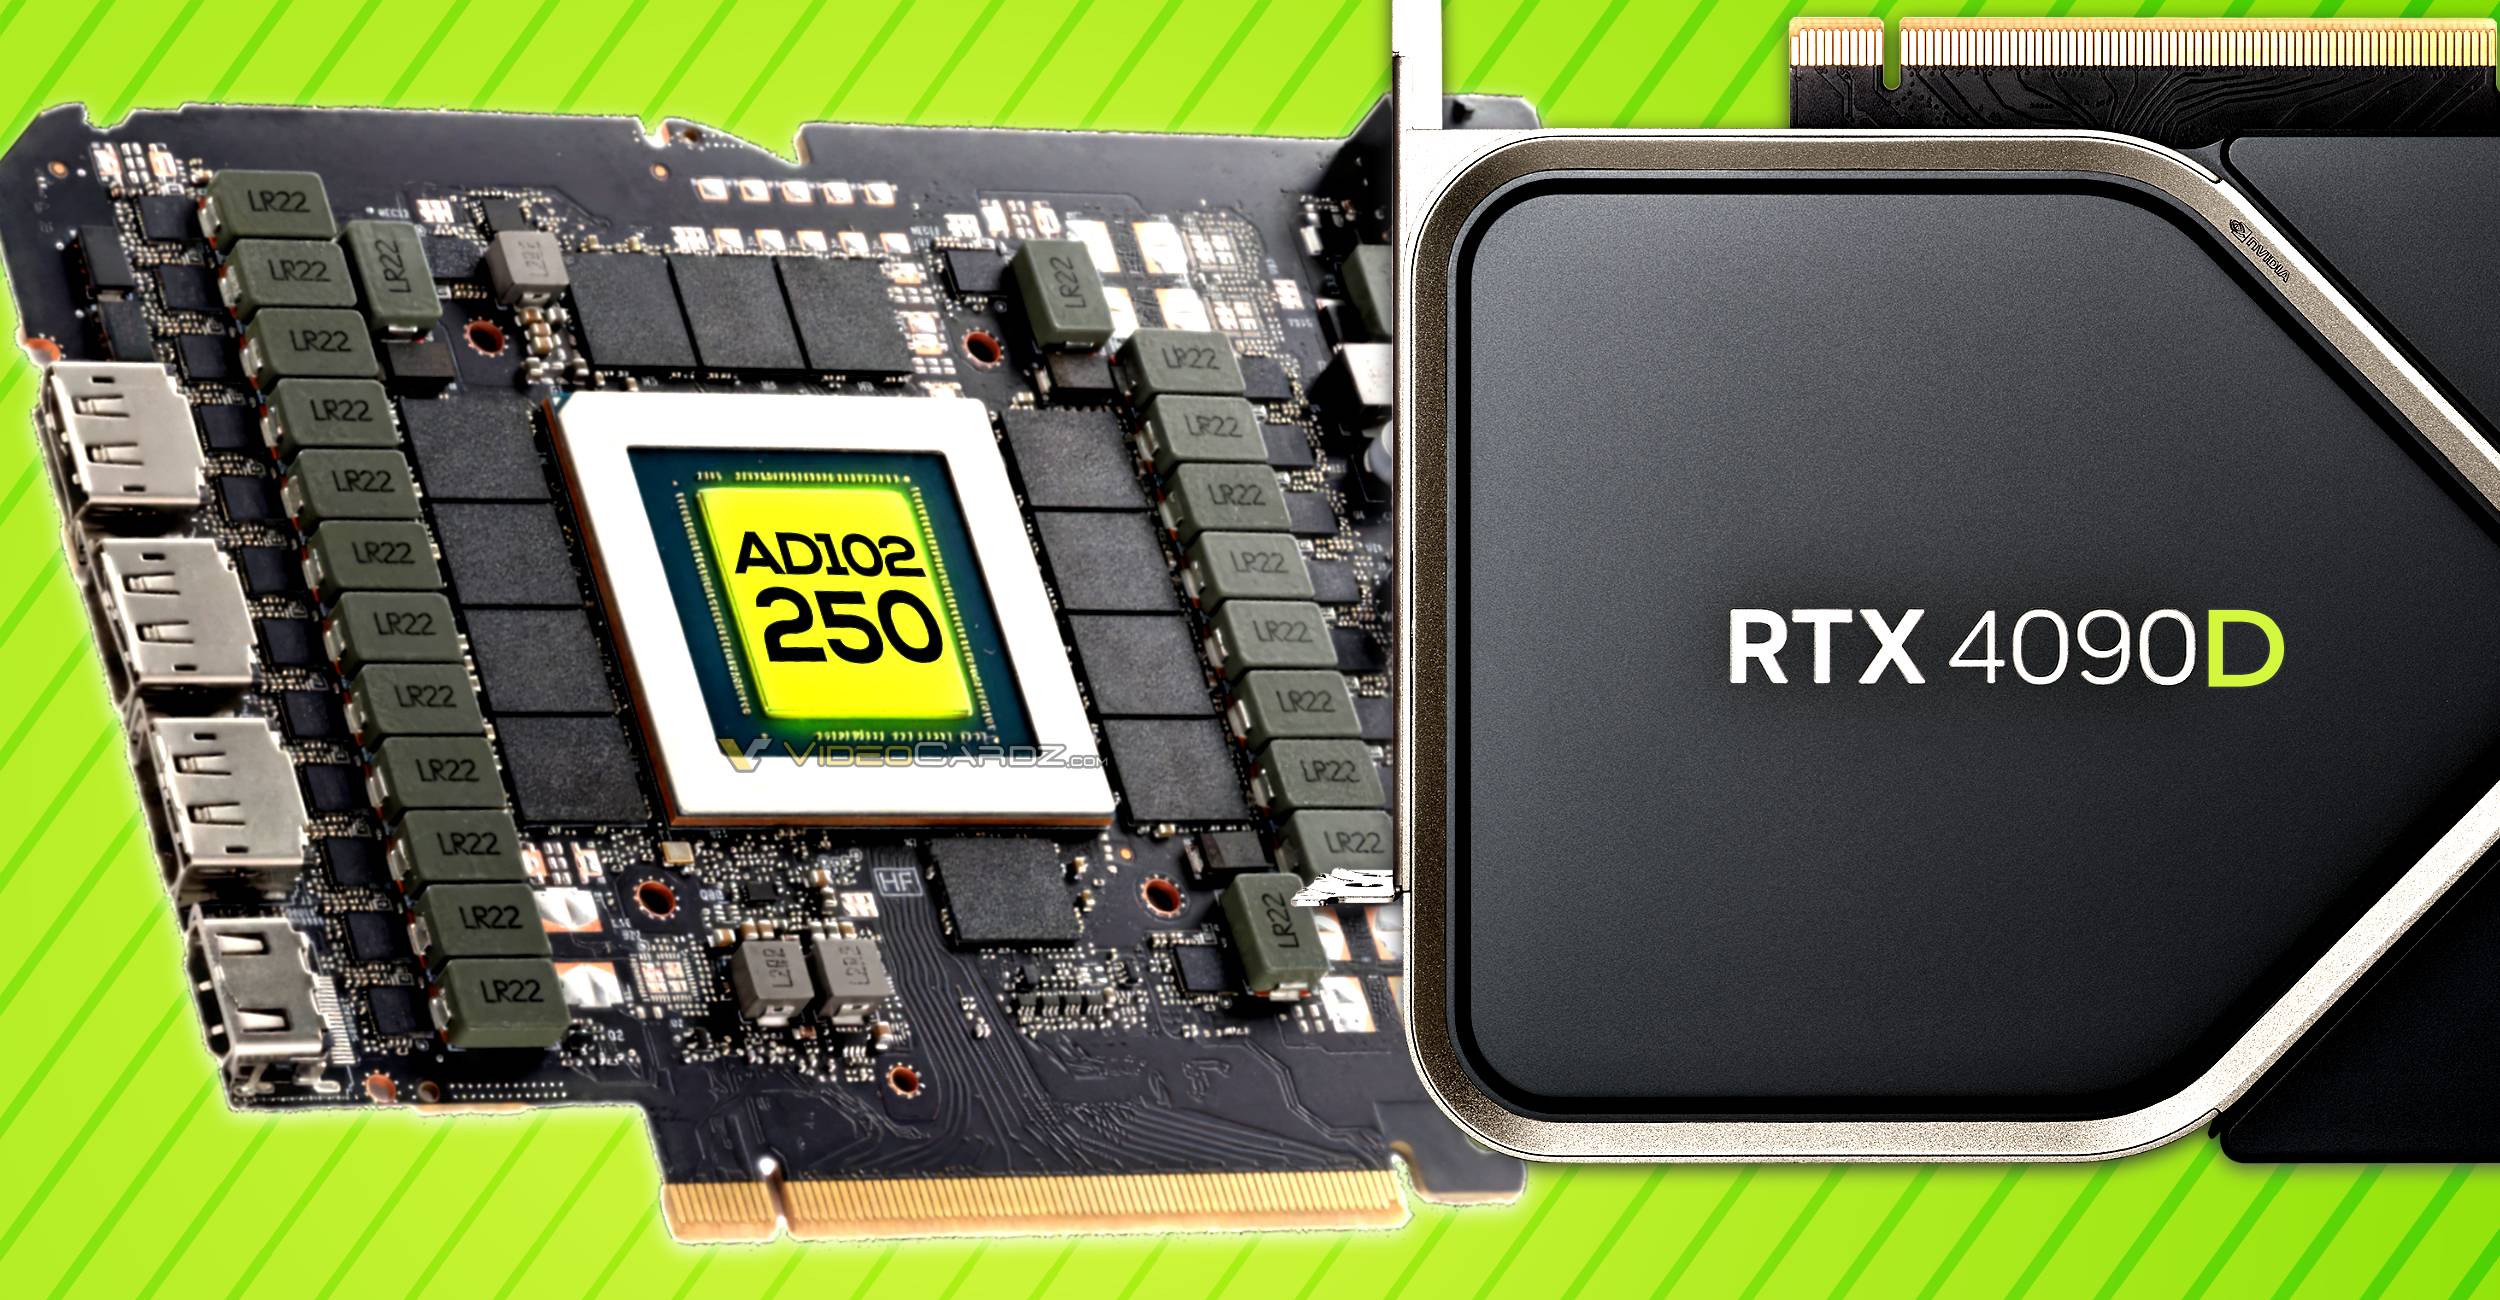 NVIDIA GeForce RTX 4090D for China features AD102-250 GPU